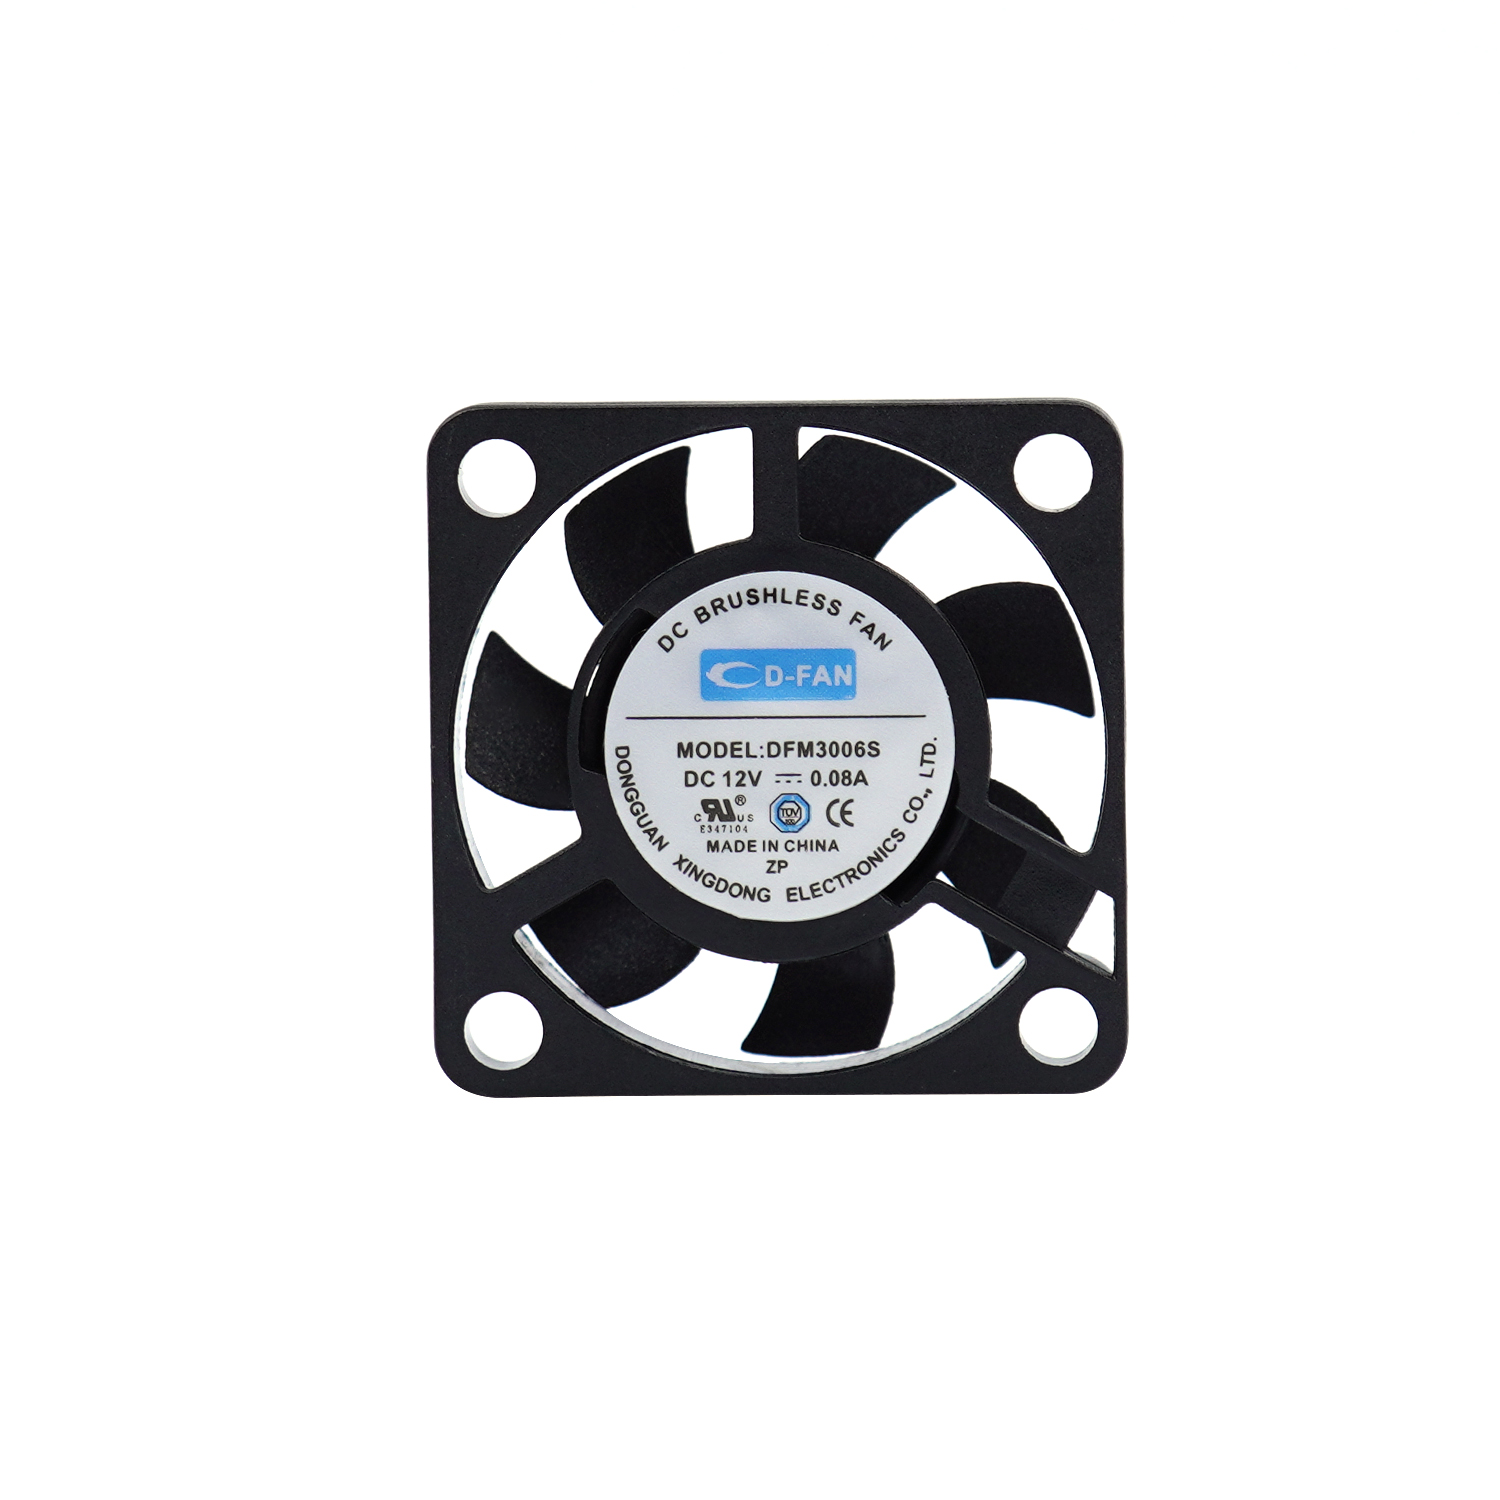 30mm Silent Fan Cooler with Fg Rd PWM